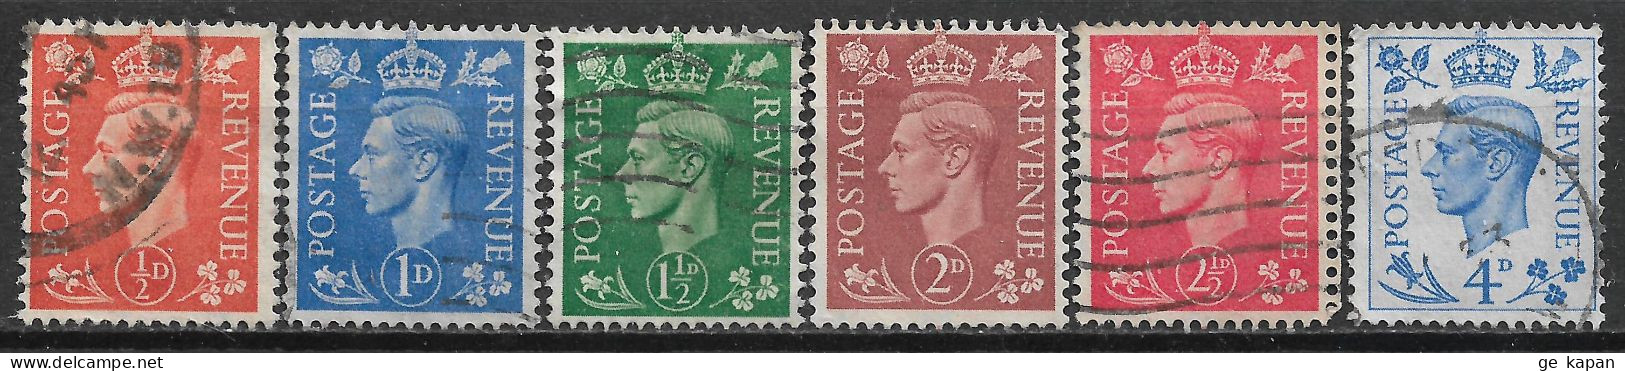 1950-1951 GREAT BRITAIN Complete Set Of 6 Used Stamps (Scott # 280-285) CV $4.00 - Usati